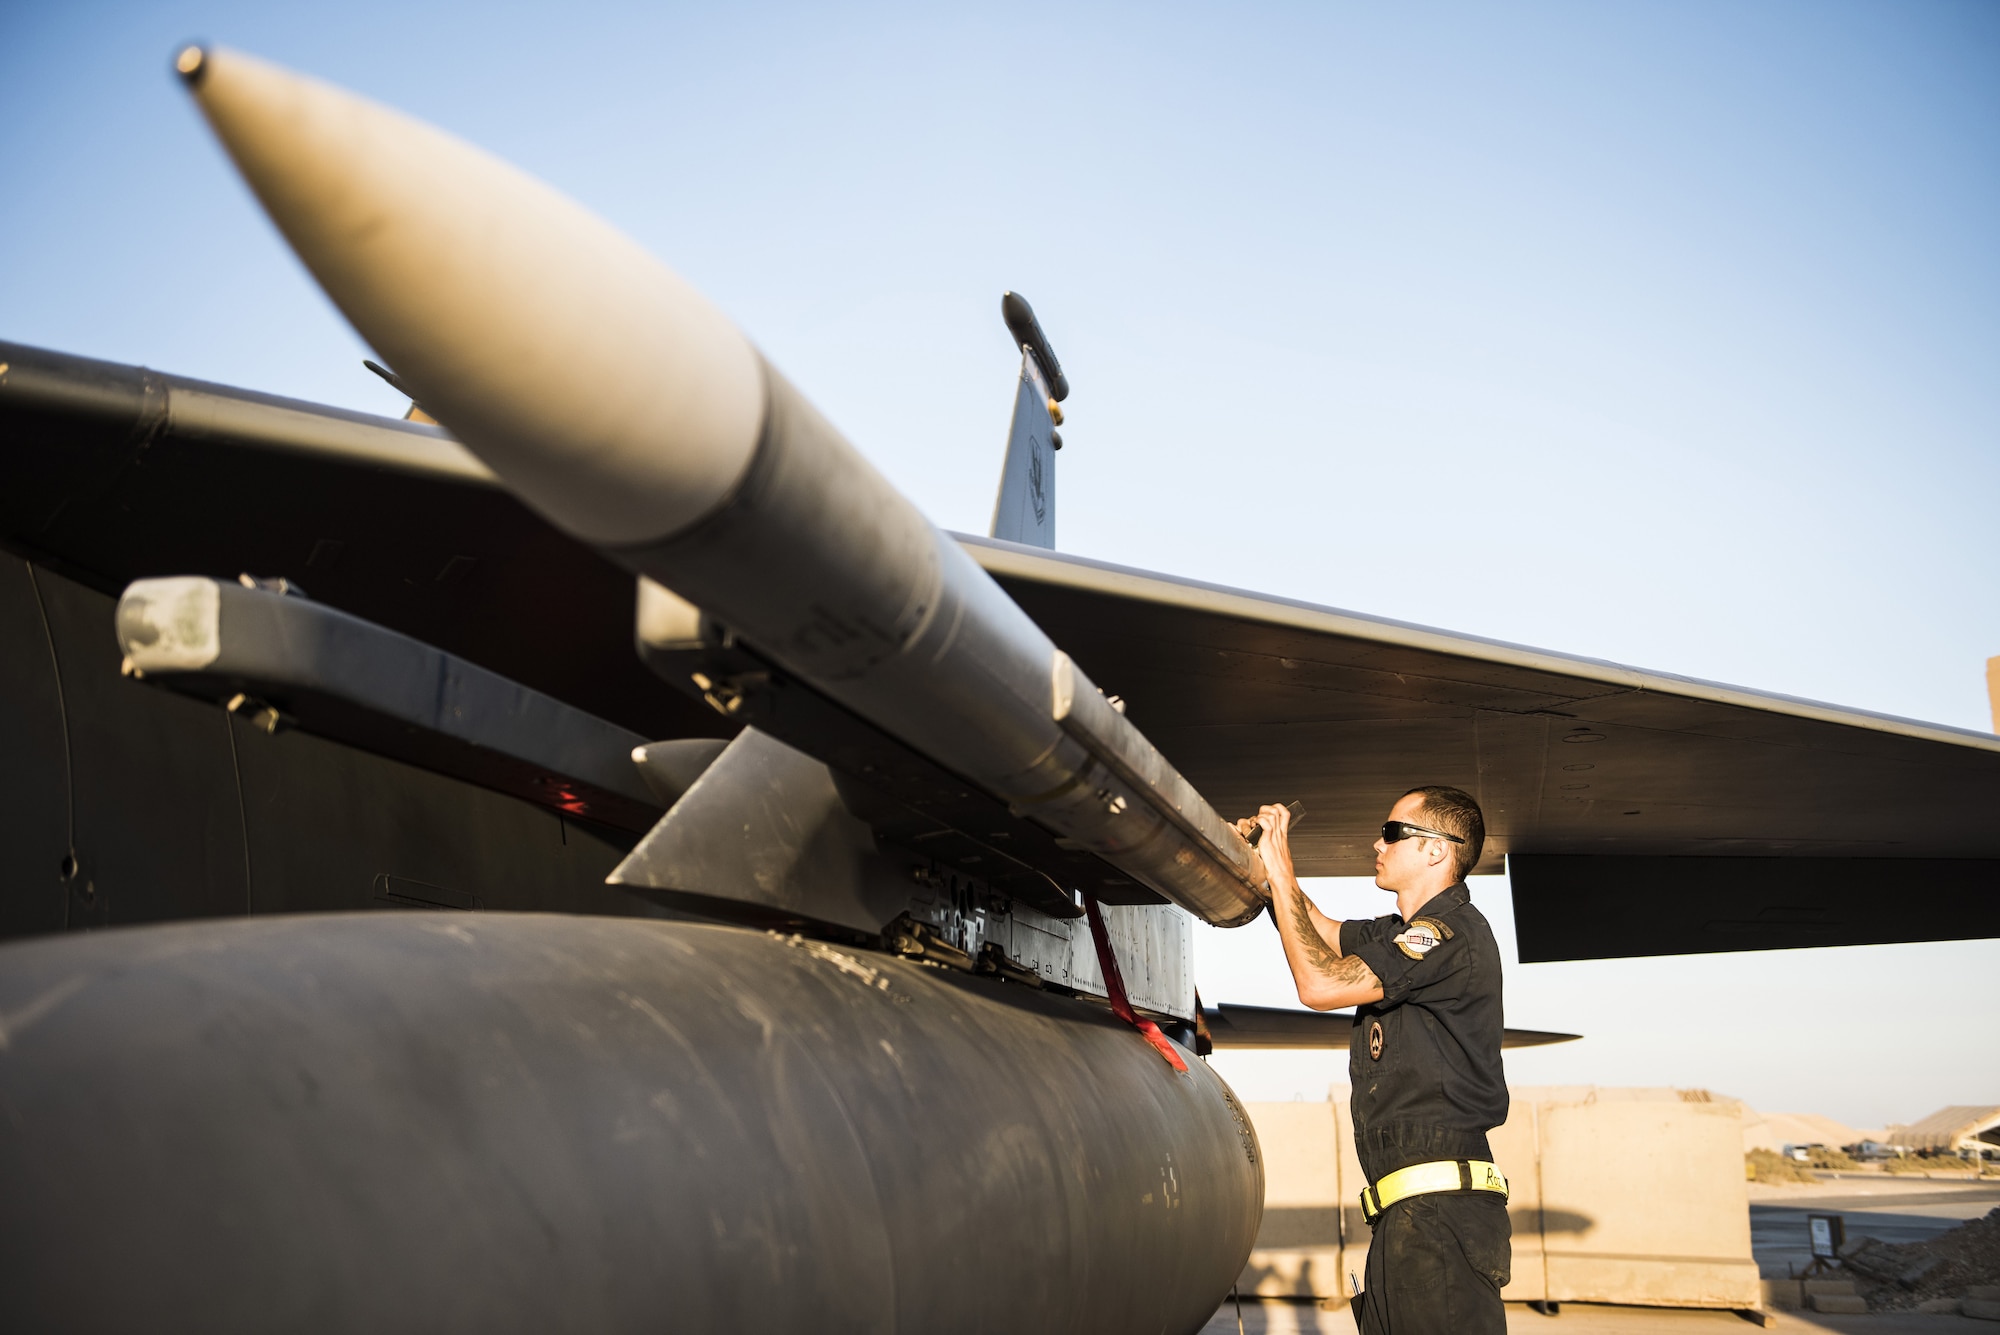 Senior Airman Hunter Barto, assigned 332d Expeditionary Maintenance Squadron, checks the placement of munitions beneath the wing of an F-15E Strike Eagle November 10, 2017 in Southwest Asia. 332d EMXS Airmen are responsible for all aspects of maintenance and upkeep on Strike Eagles assigned to the 332d Air Expeditionary Wing, which has been the primary provider of air power in support of Operation Inherent Resolve. (U.S. Air Force photo by Staff Sgt. Joshua Kleinholz)